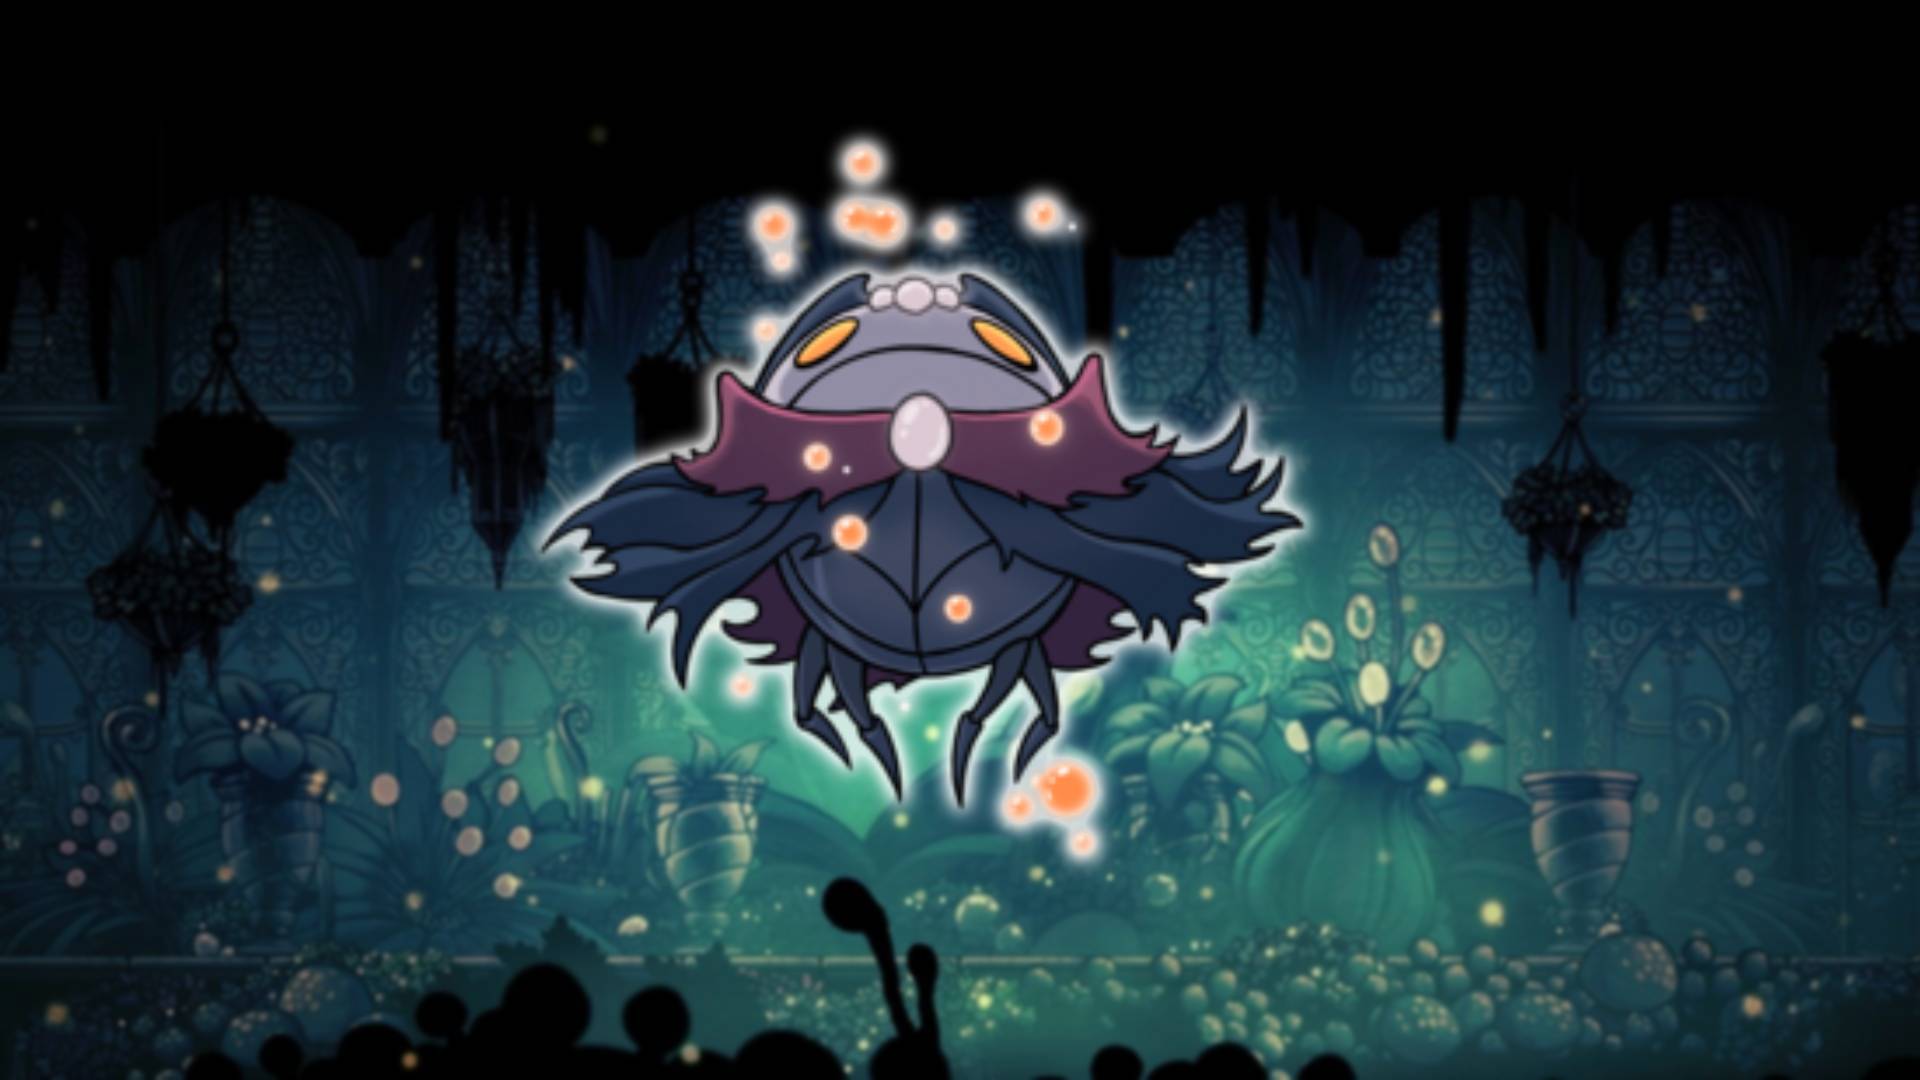 Soul Master - the Hollow Knight boss, is visible against a mossy green background area from Hollow Knight 